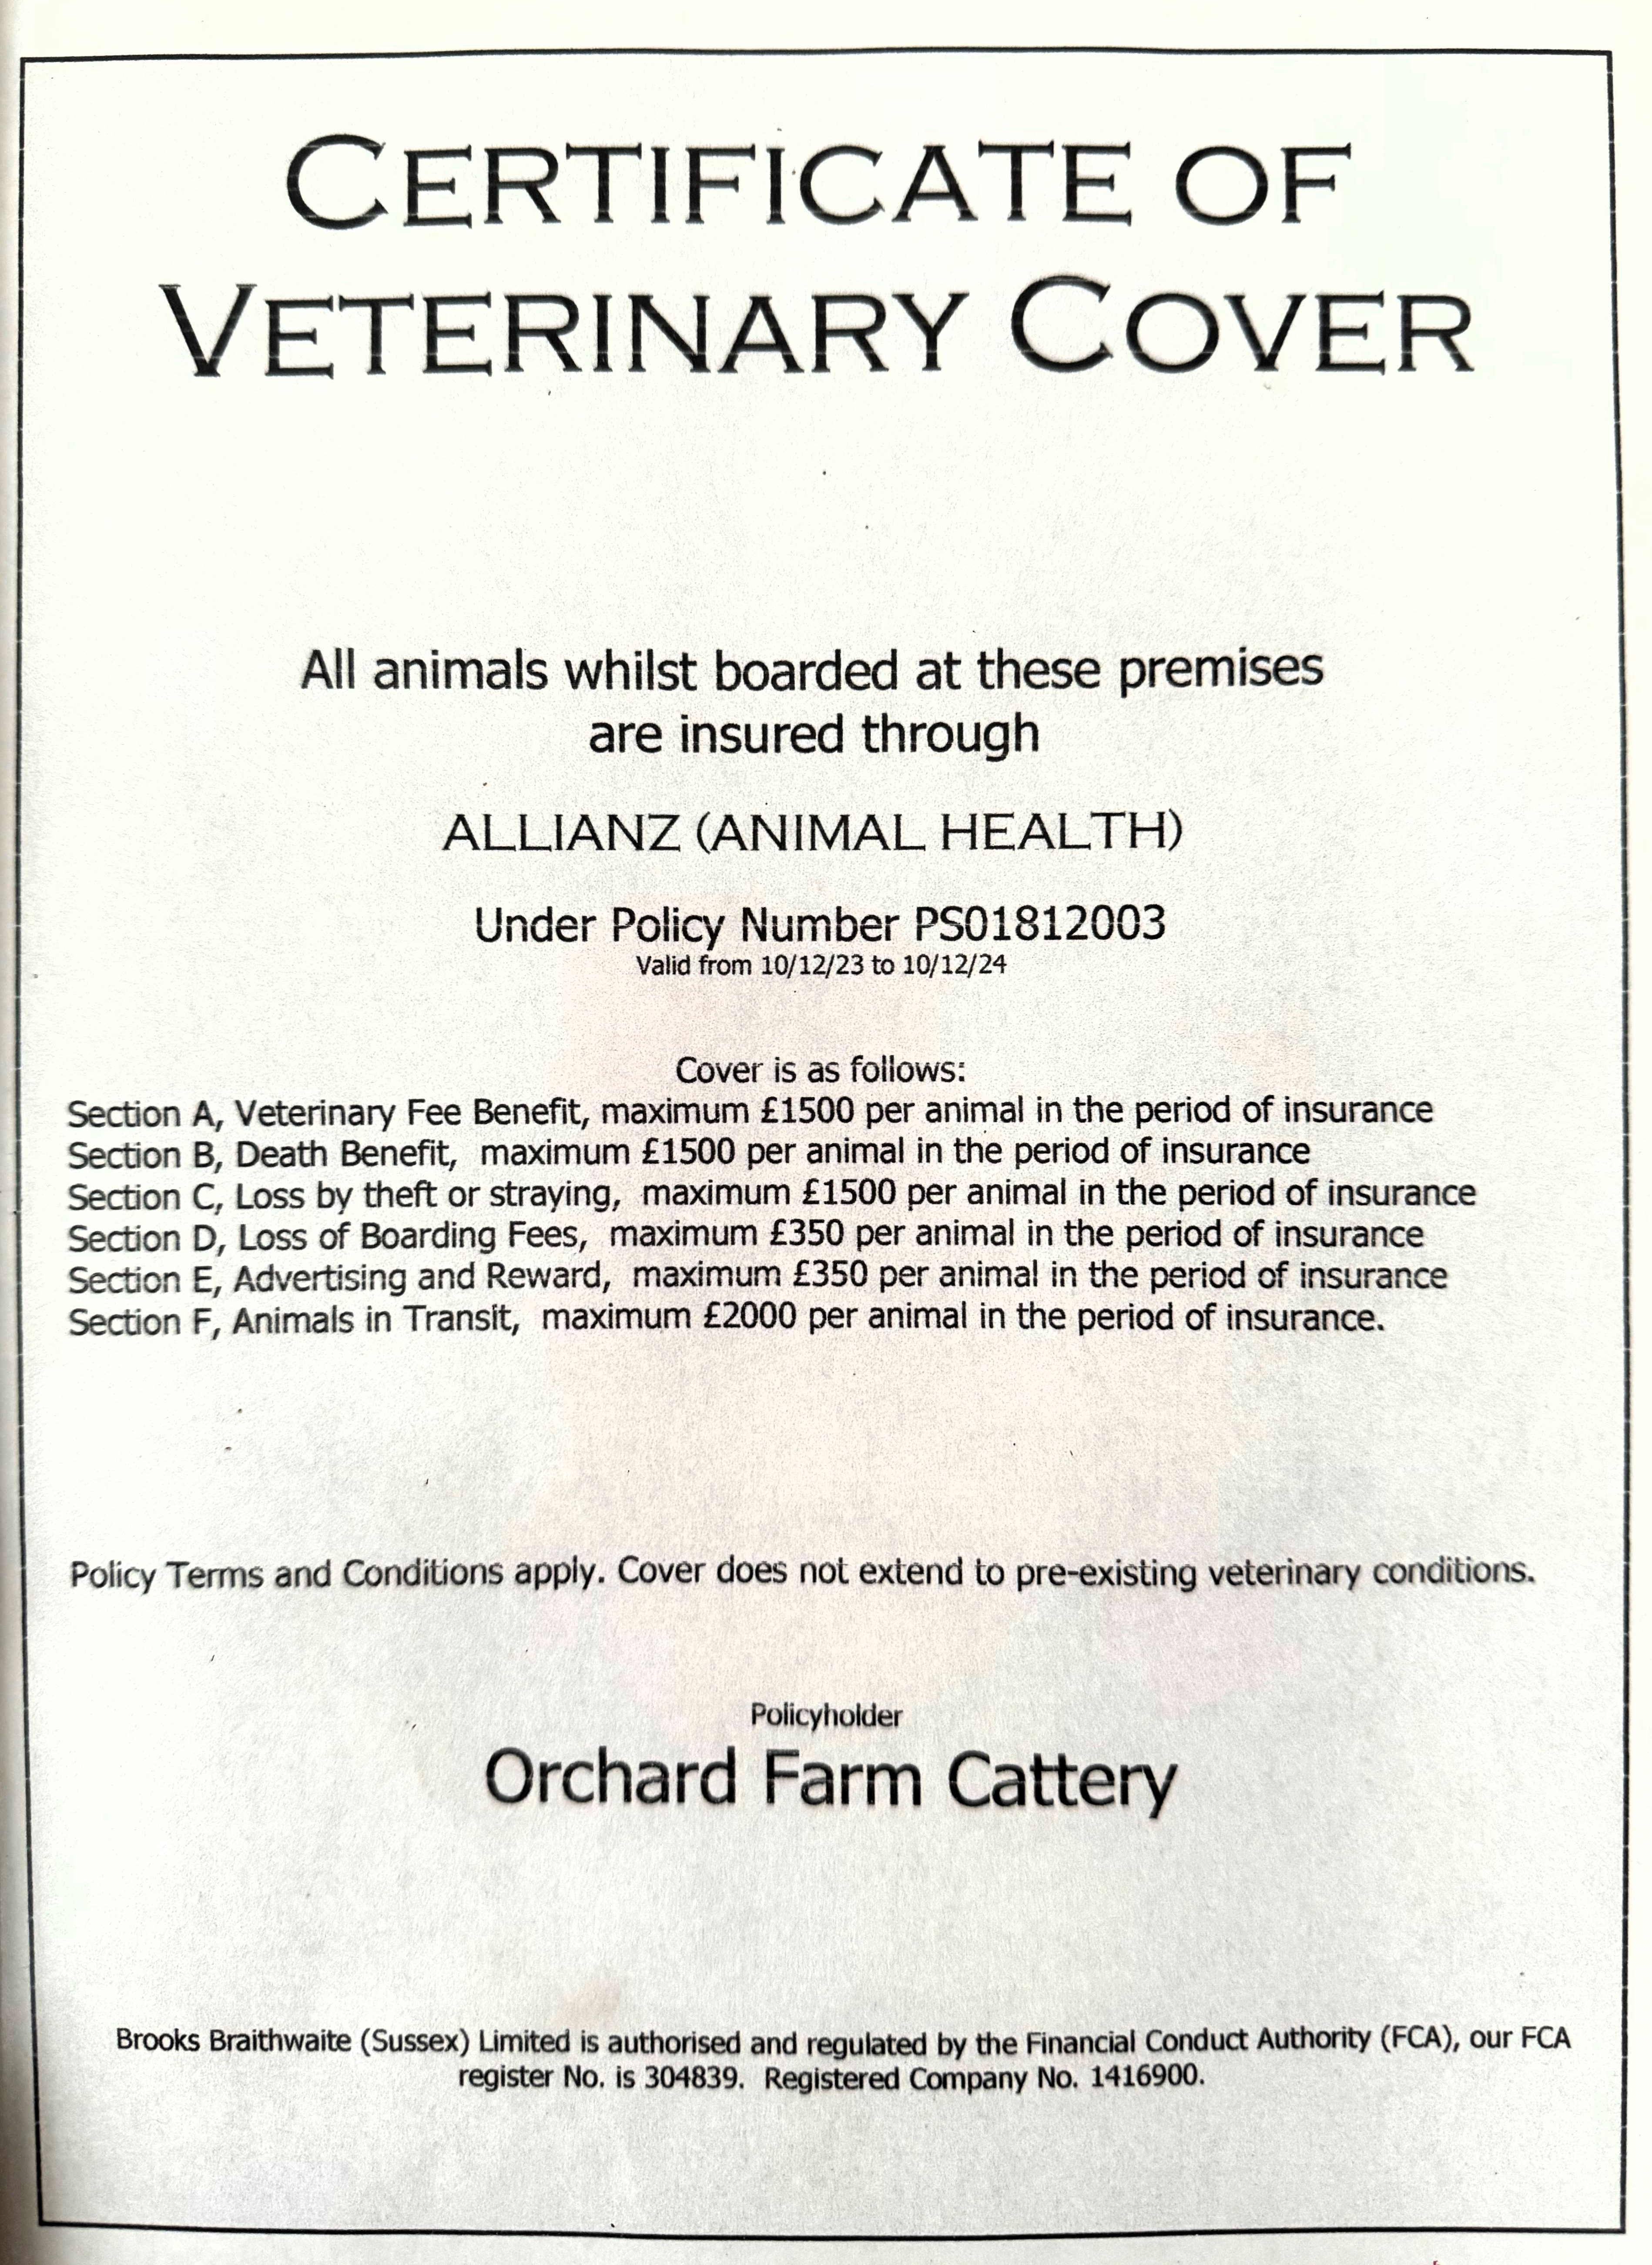 Certificate of Veterinary Approval